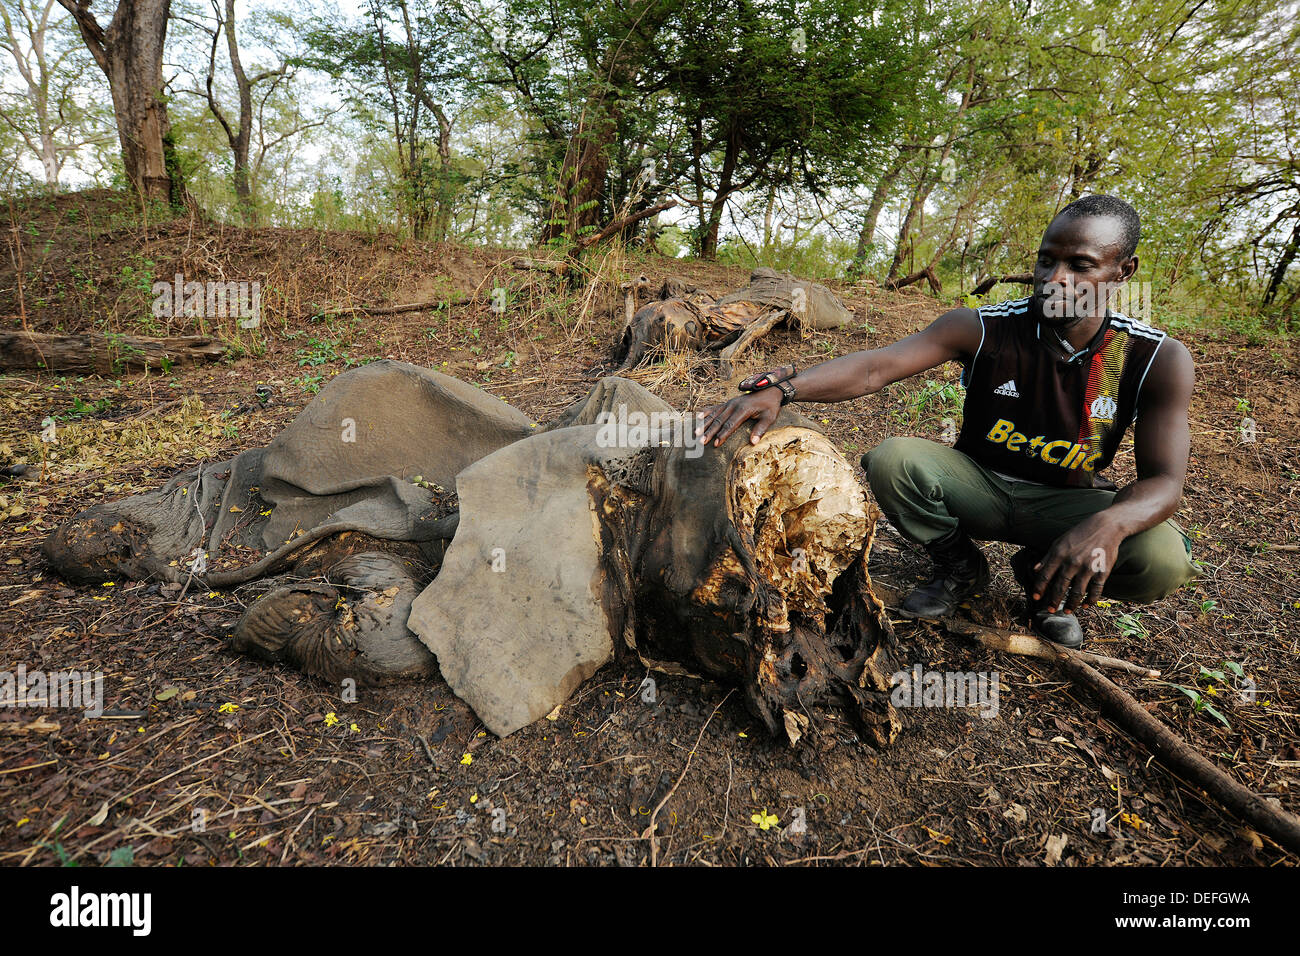 Remains of a young elephant which has fallen victim to poachers, Bouba Njida National Park, Cameroon Stock Photo